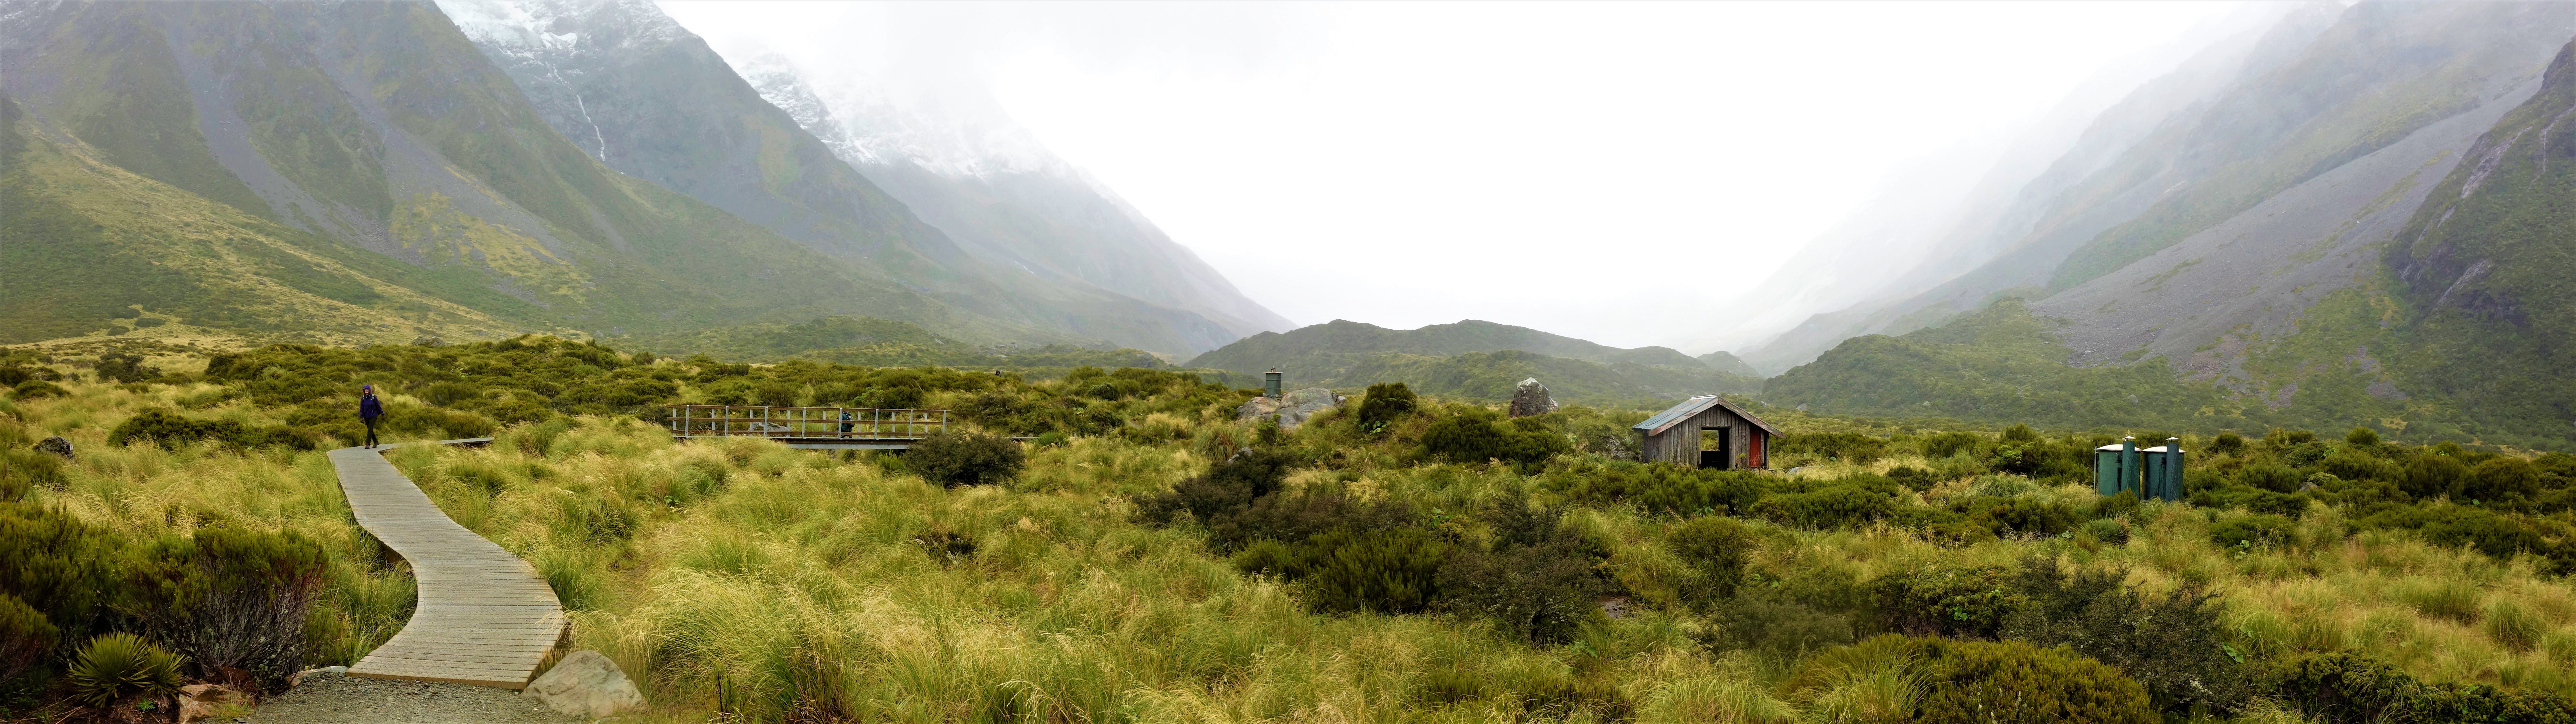 General 9568x2691 New Zealand Mt Cook mountains